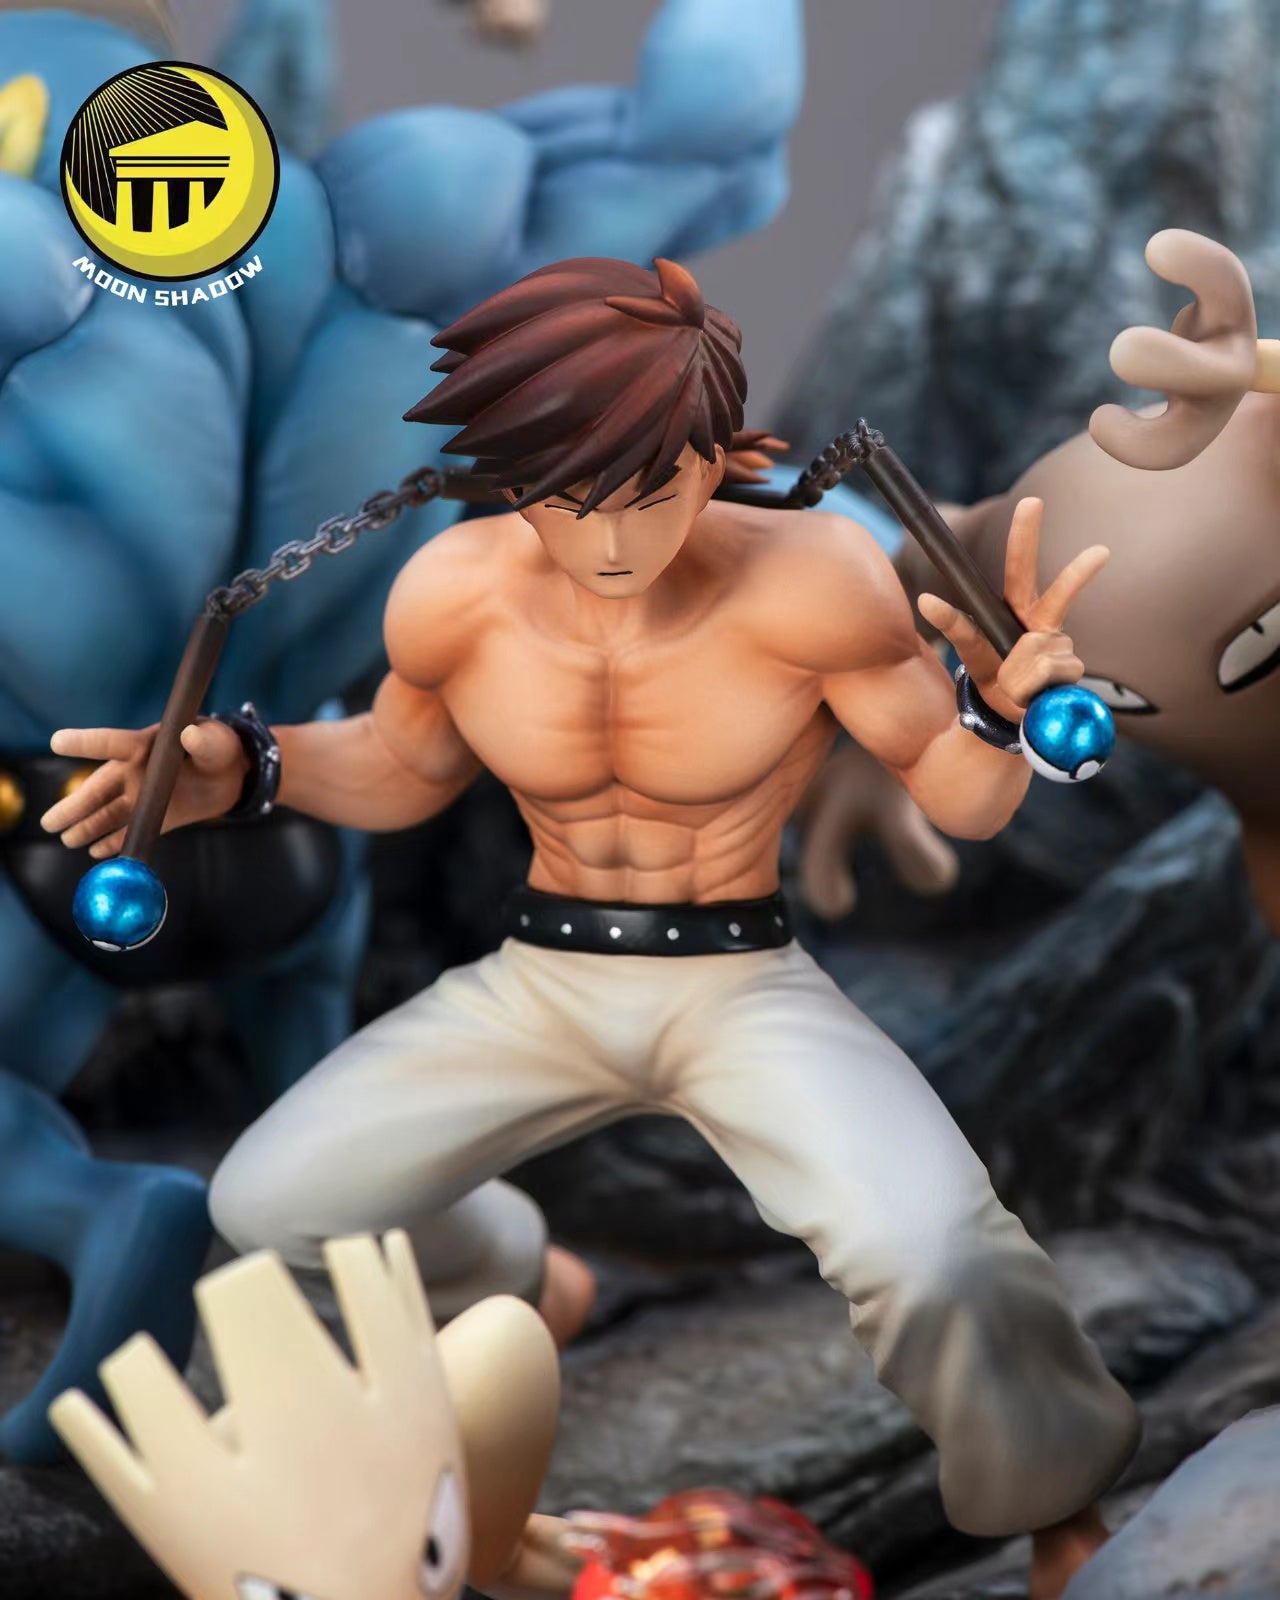 〖Sold Out〗Pokemon Four Kings Series Bruno Model Statue Resin  - Moon shadow Studio